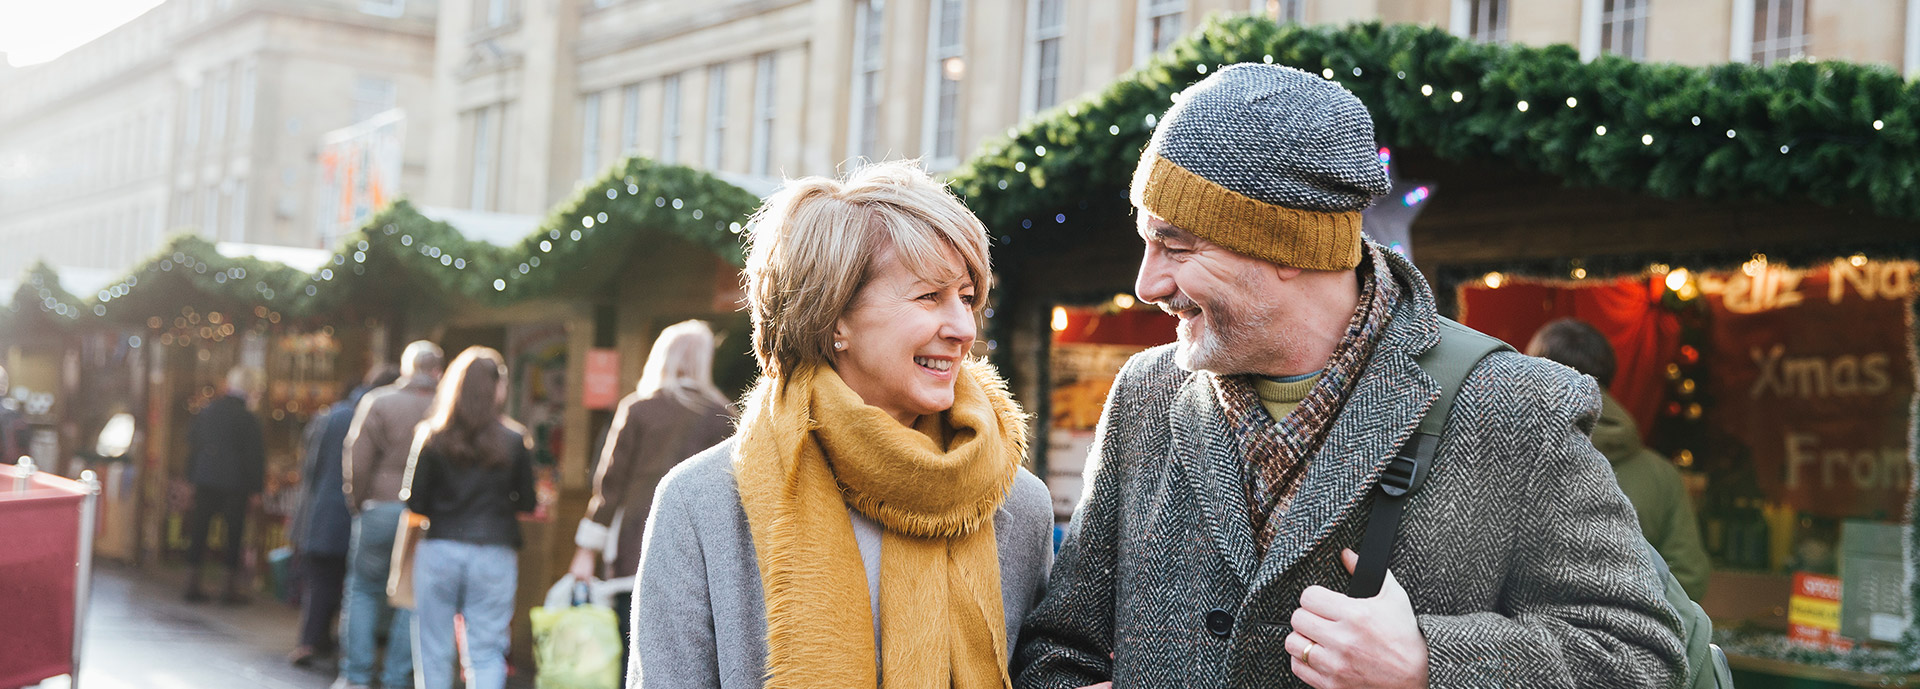 Image of a mature couple at market smiling